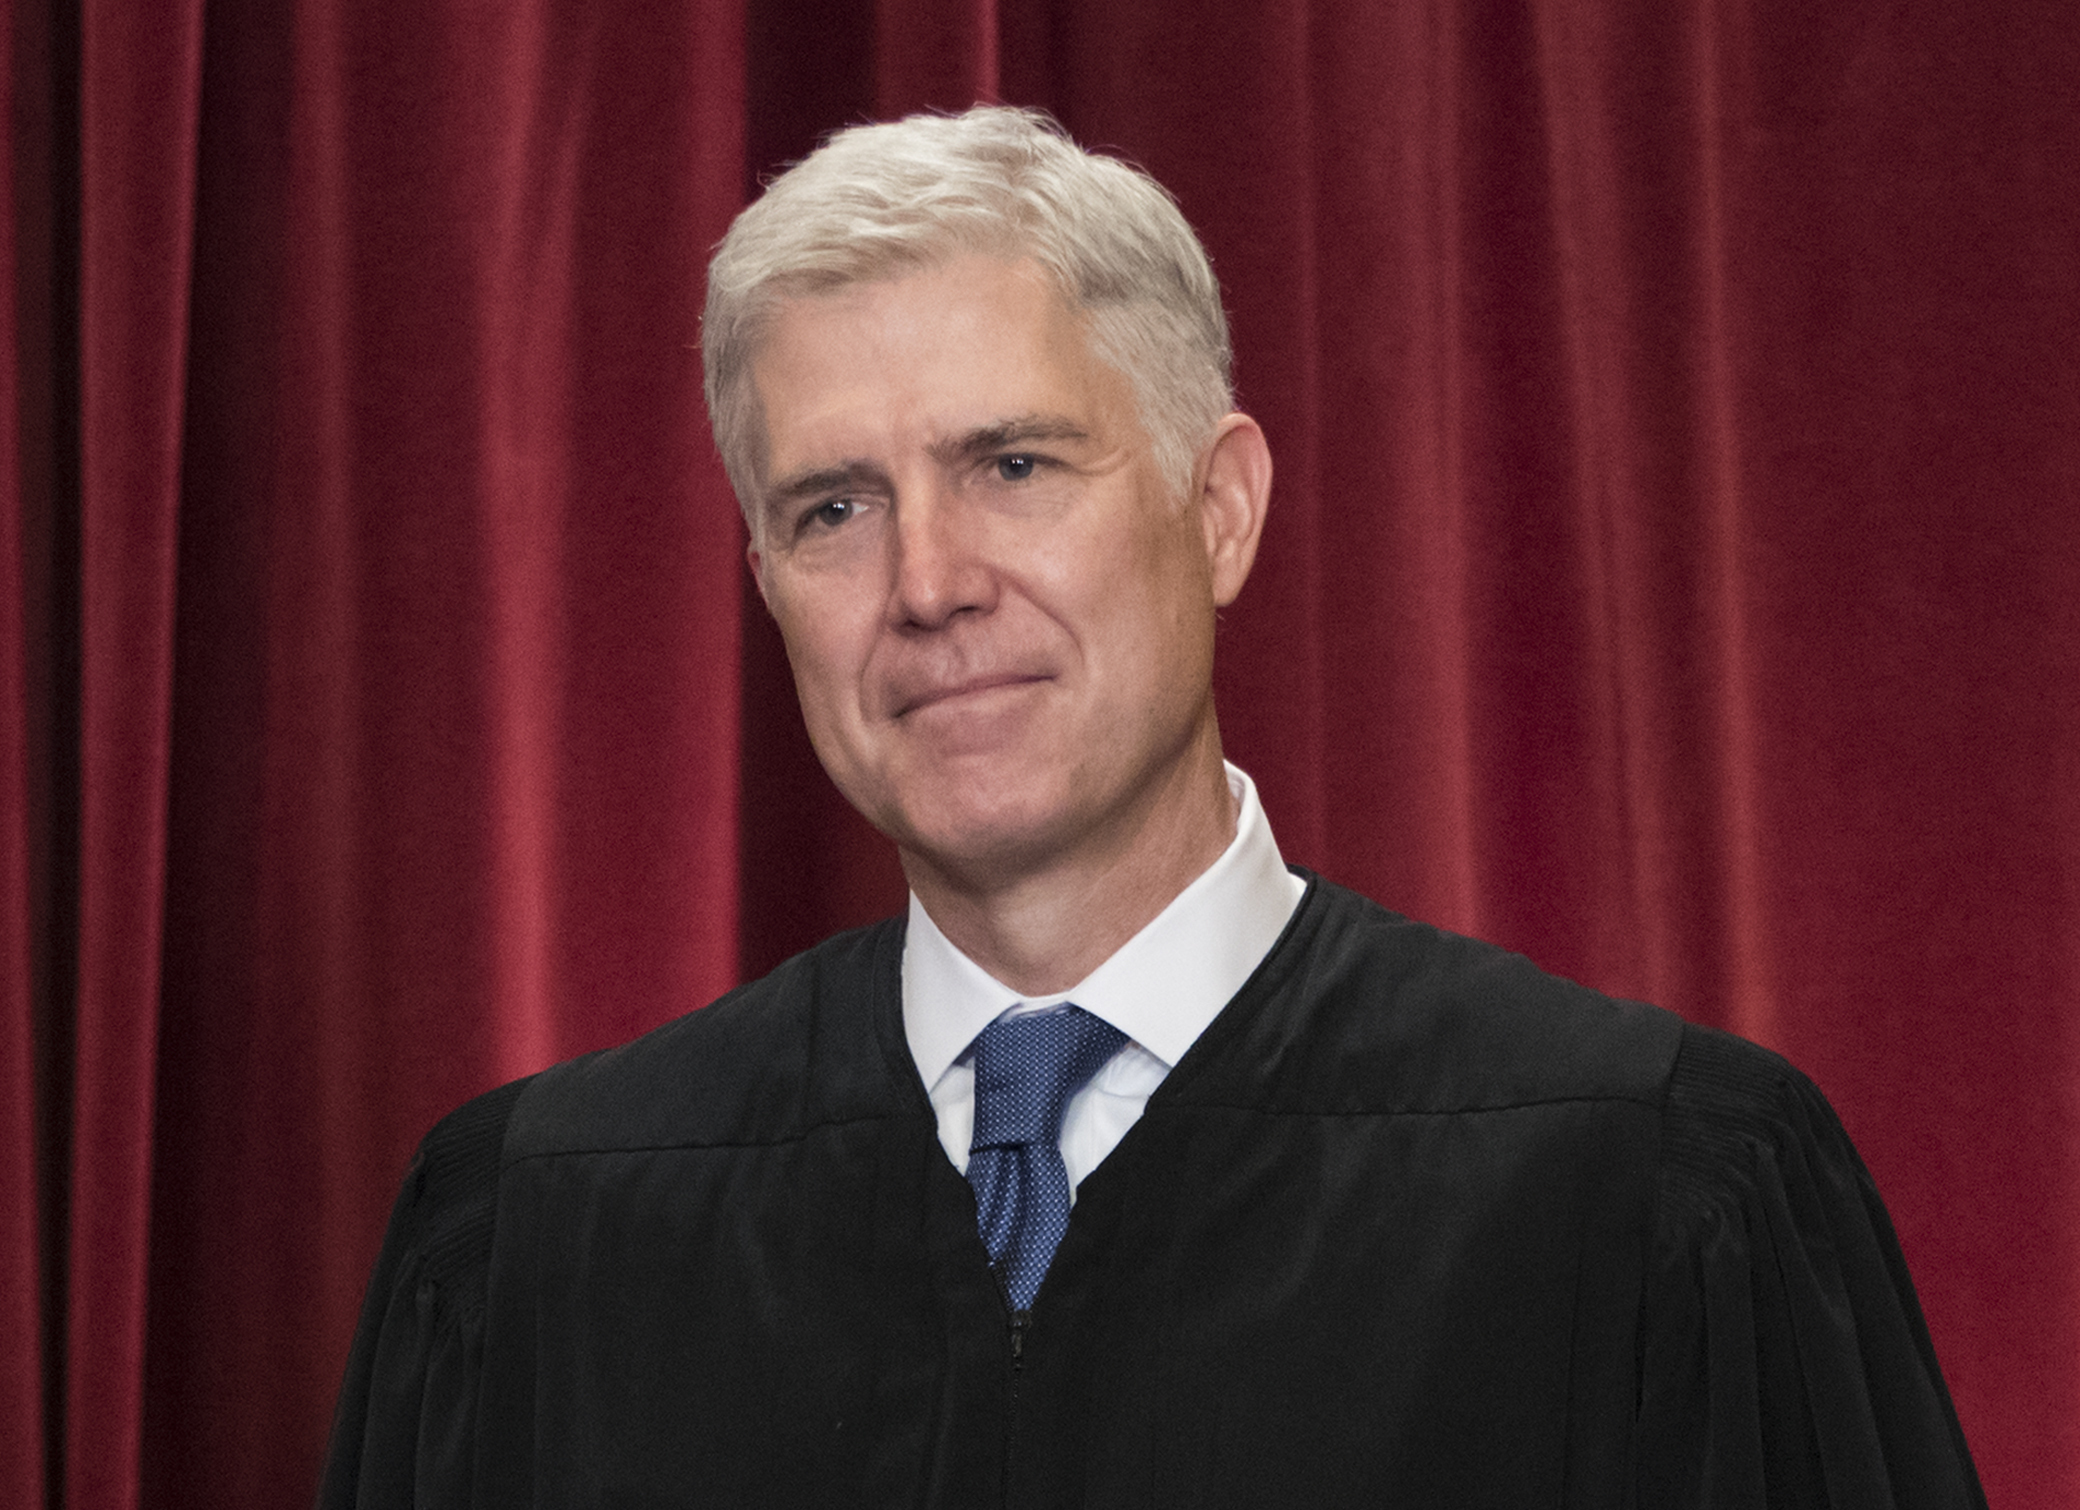 Associate Justice Neil Gorsuch joins other justices of the U.S. Supreme Court for an official group portrait at the Supreme Court Building in Washington, Thursday. June 1, 2017. 